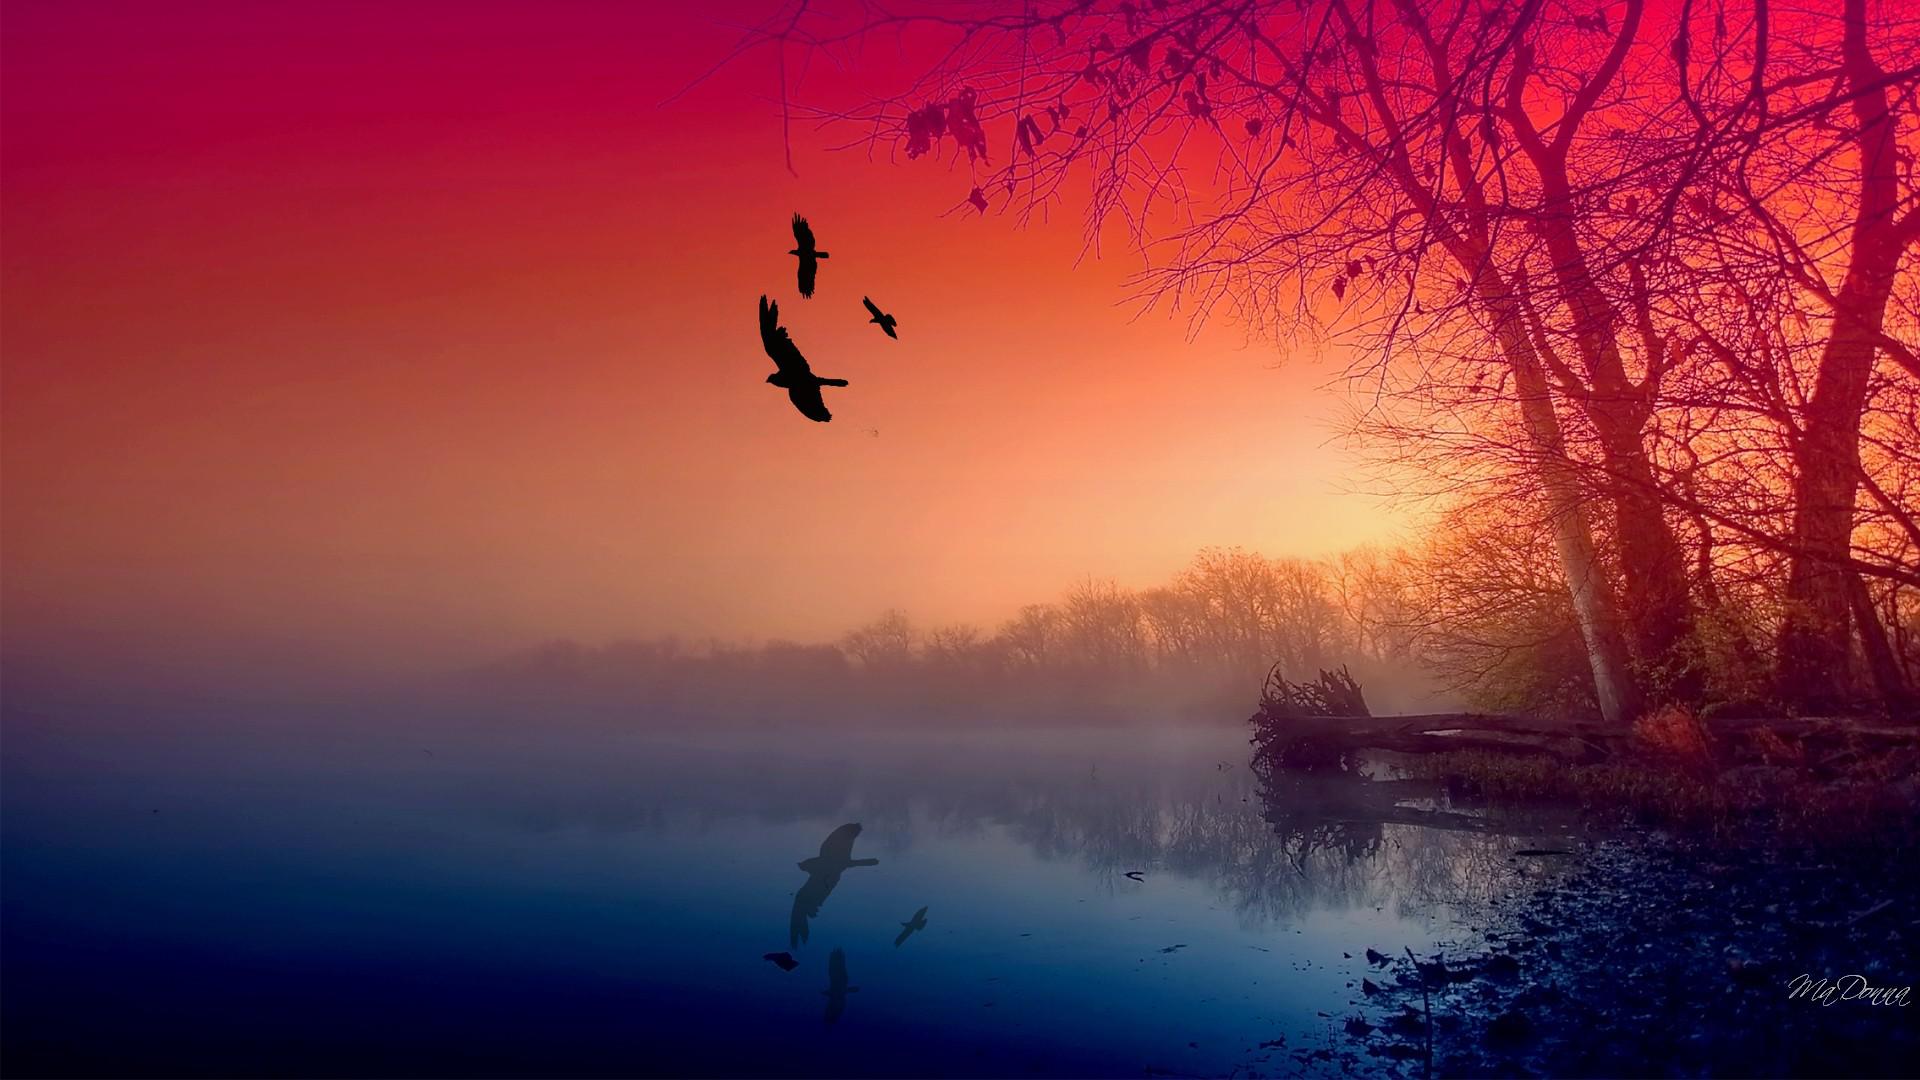 Misty fall sunrise - - High Quality and Resolution